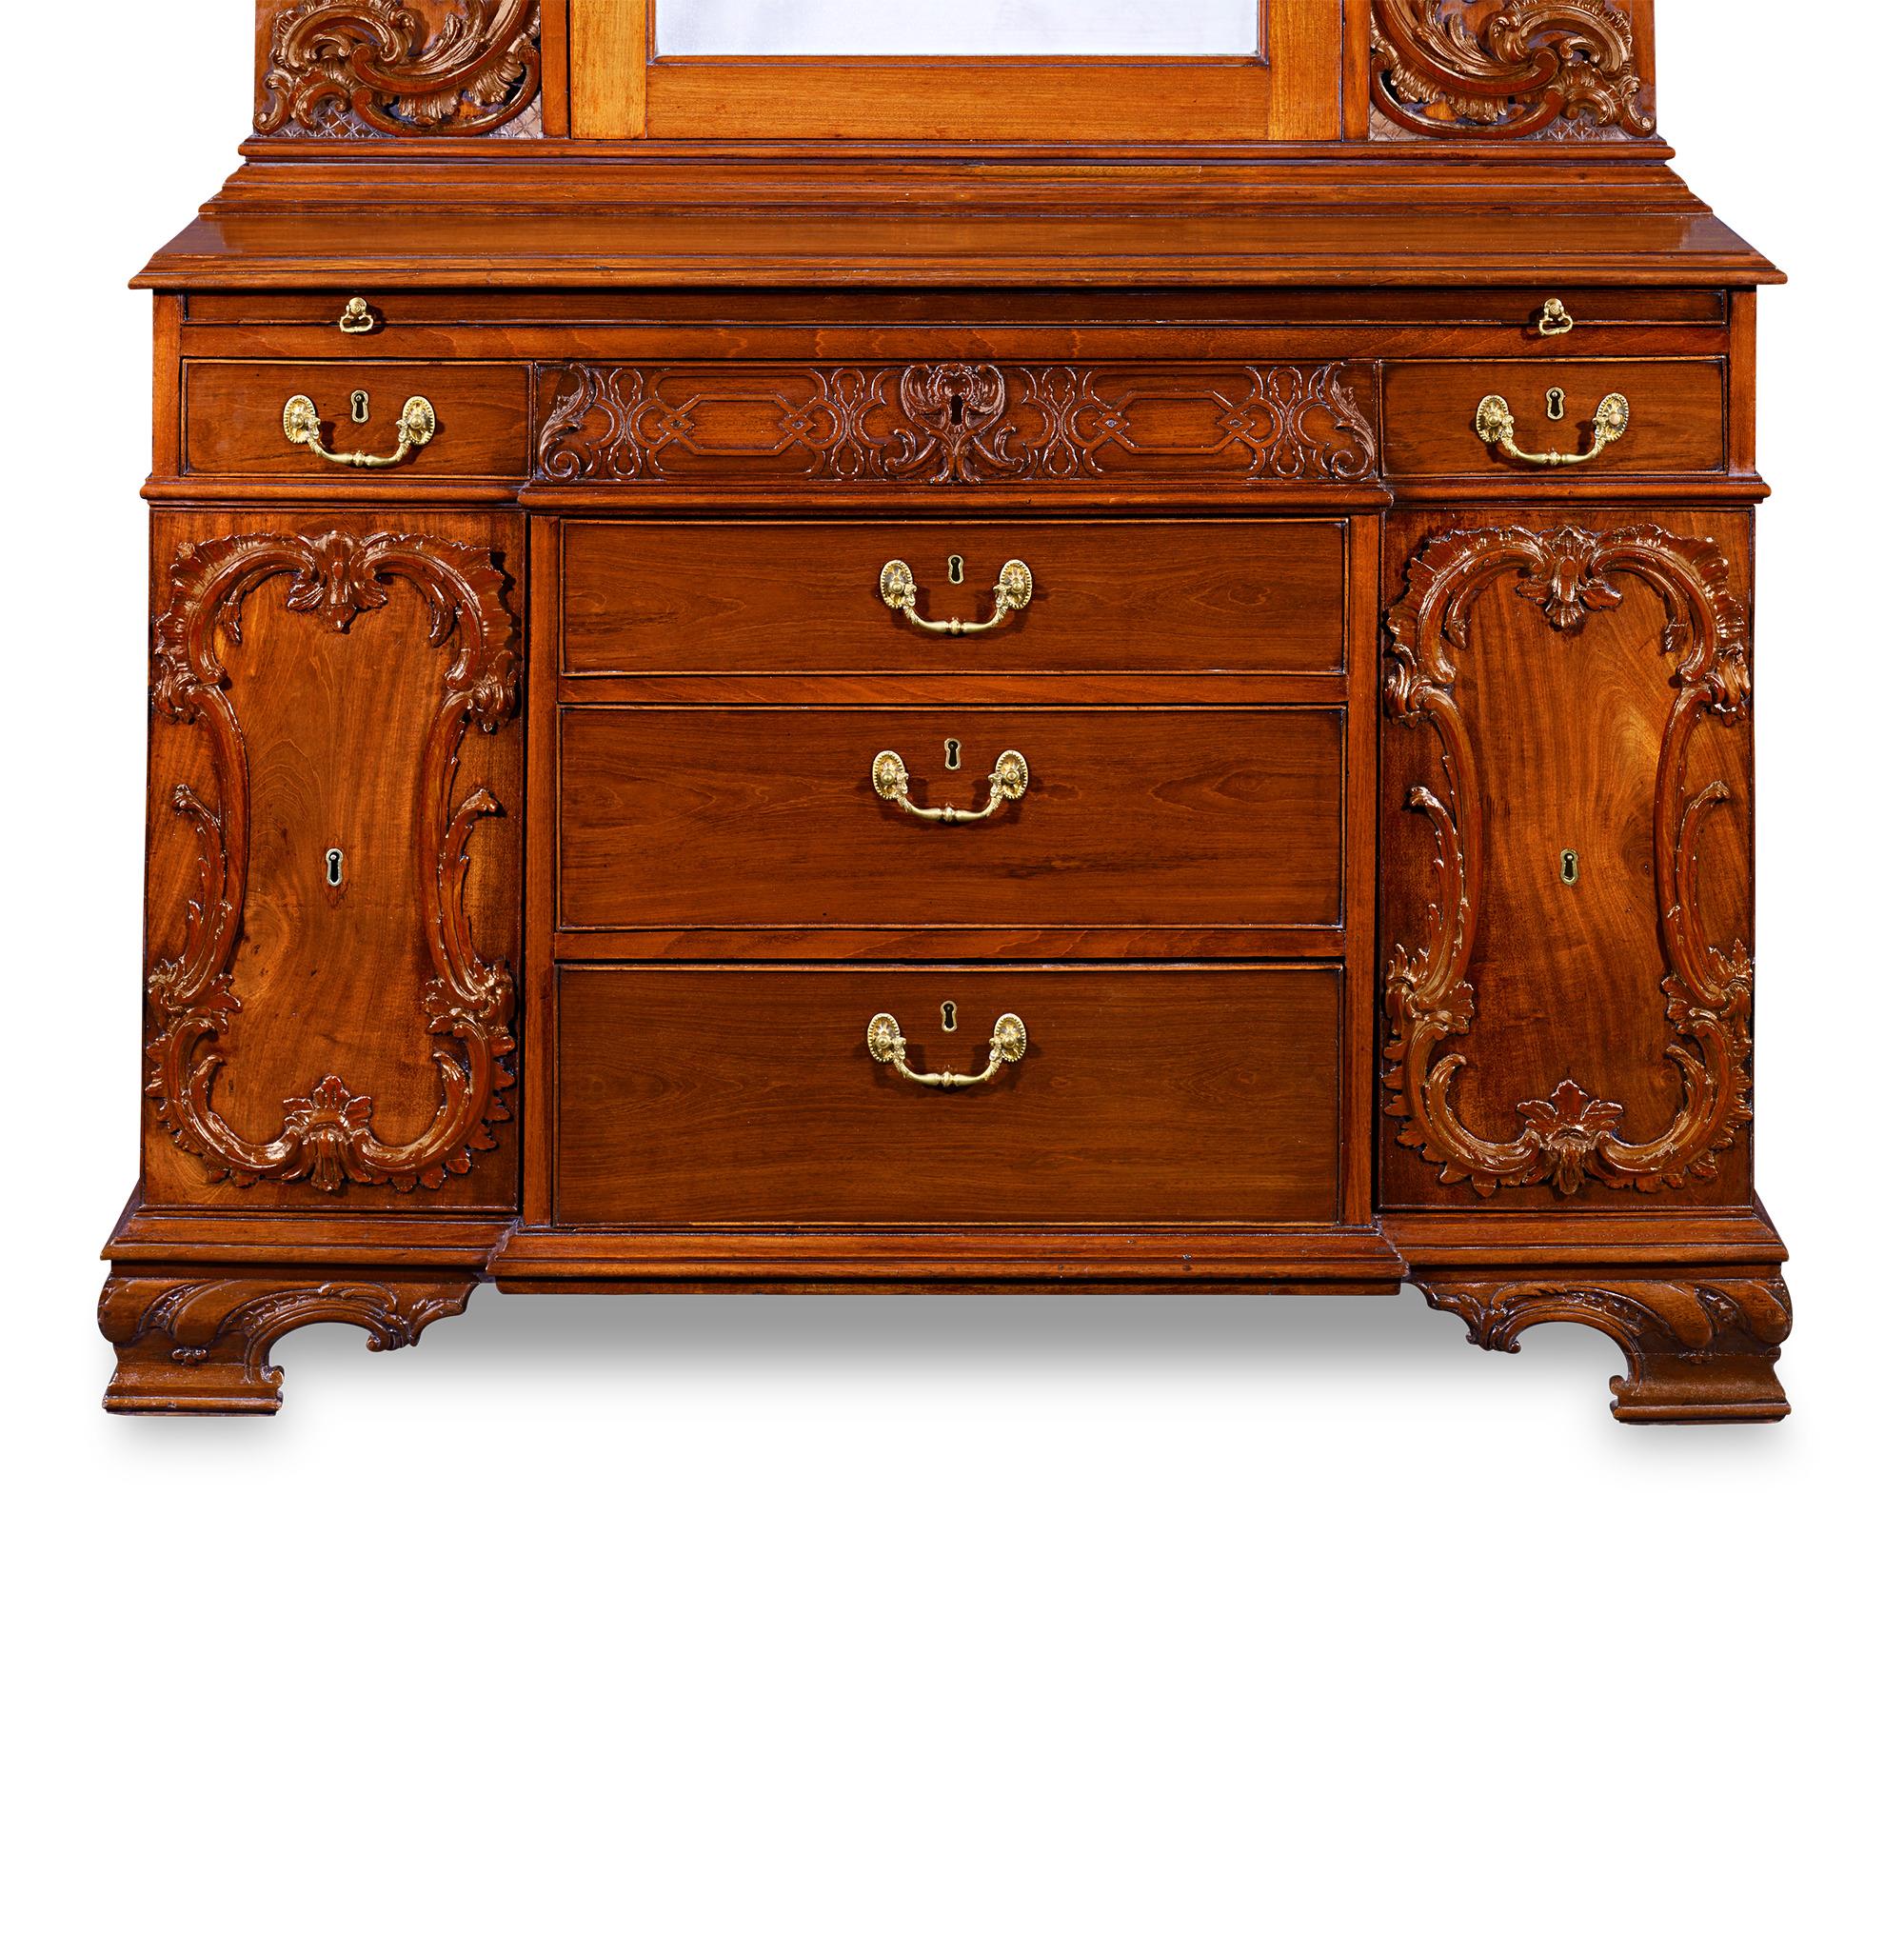 Mahogany Bureau Cabinet After Thomas Chippendale In Excellent Condition For Sale In New Orleans, LA